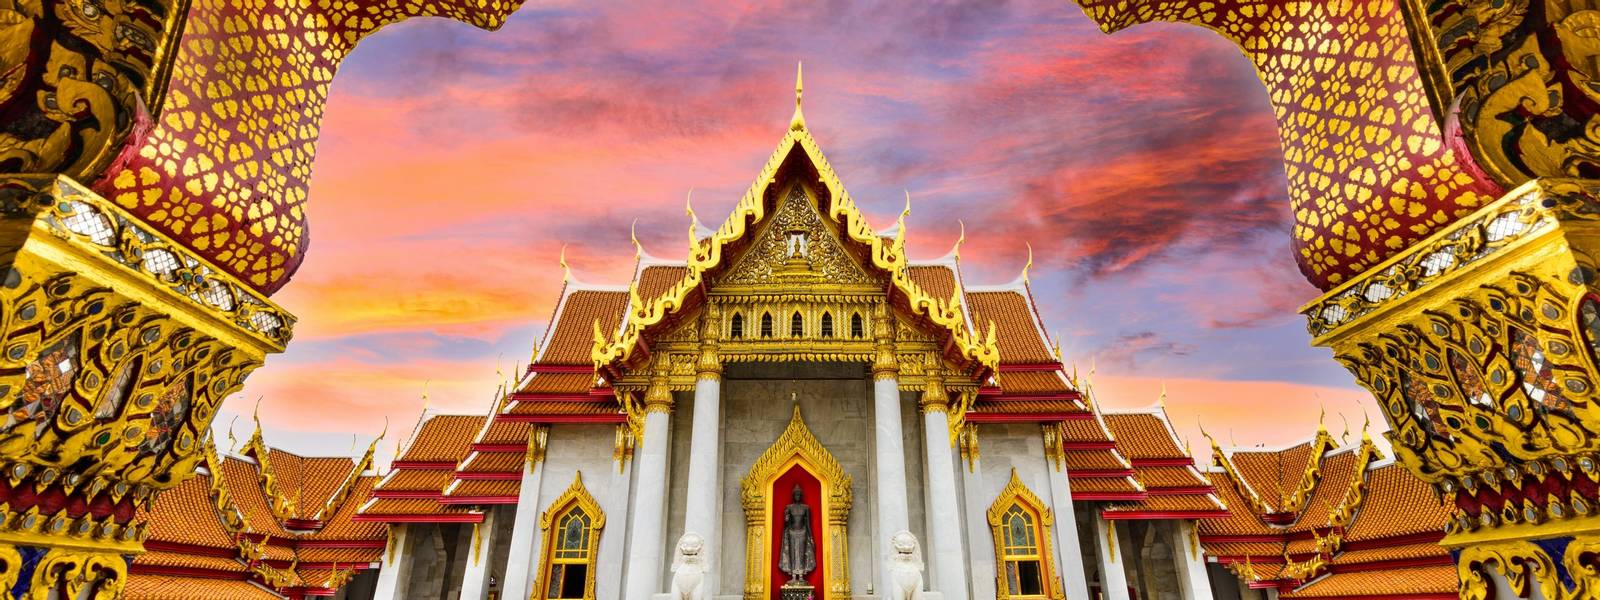 Thailand - Marble Temple - Bangkok - From Agent.jpg